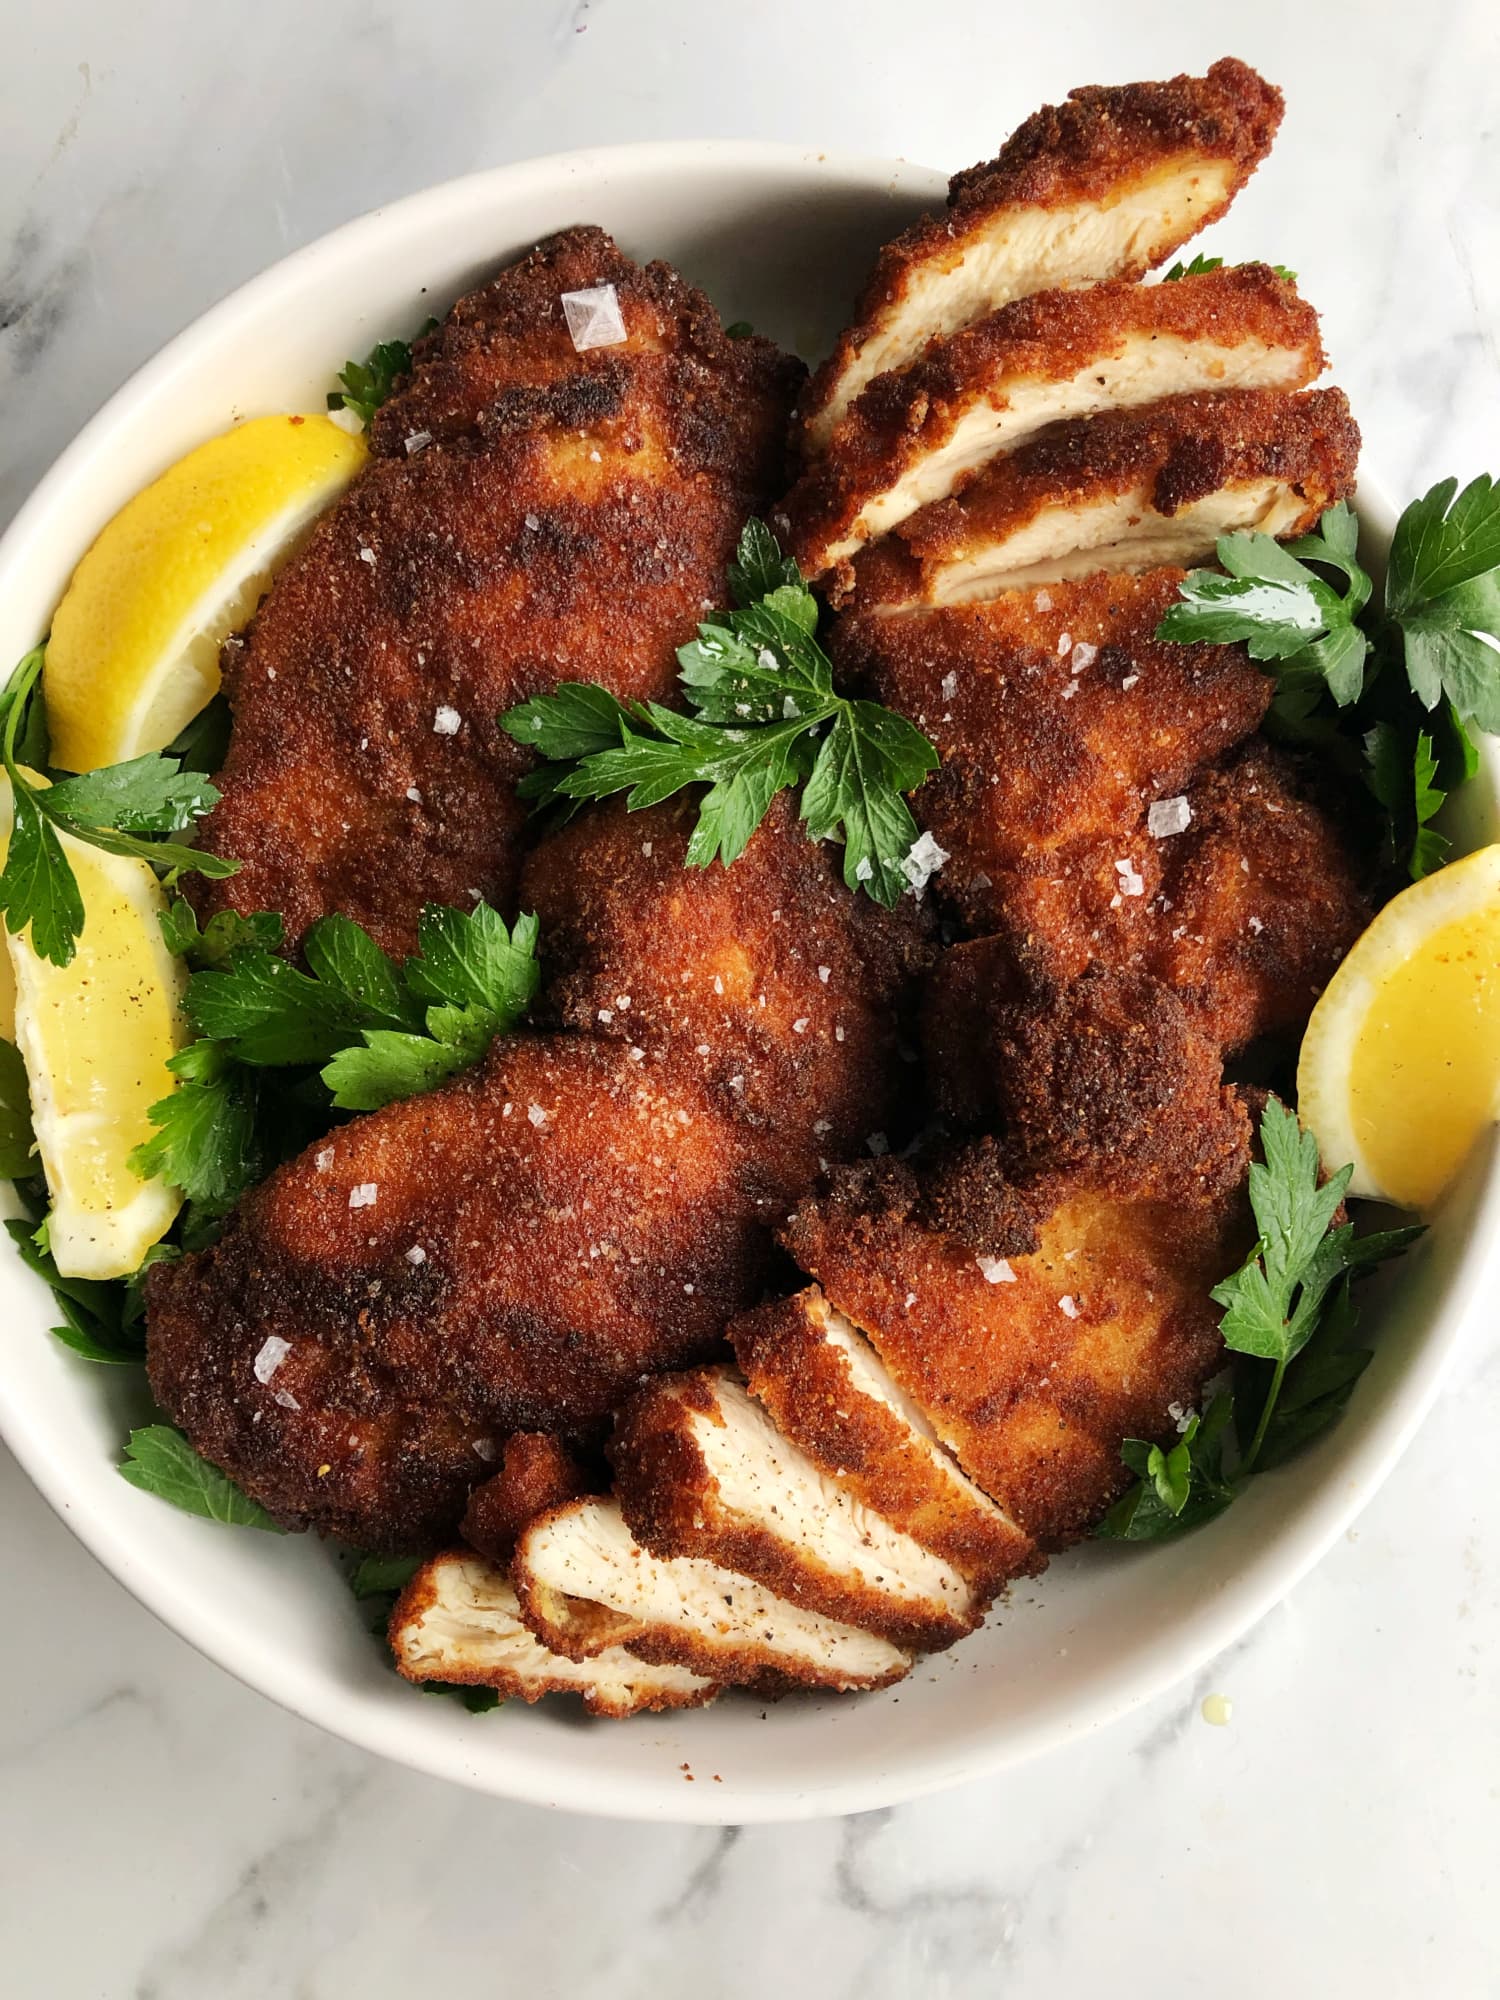 I Tried Smitten Kitchen’s “Crispiest” Chicken Cutlets and They Are Absolute Perfection — Here’s Her Secret